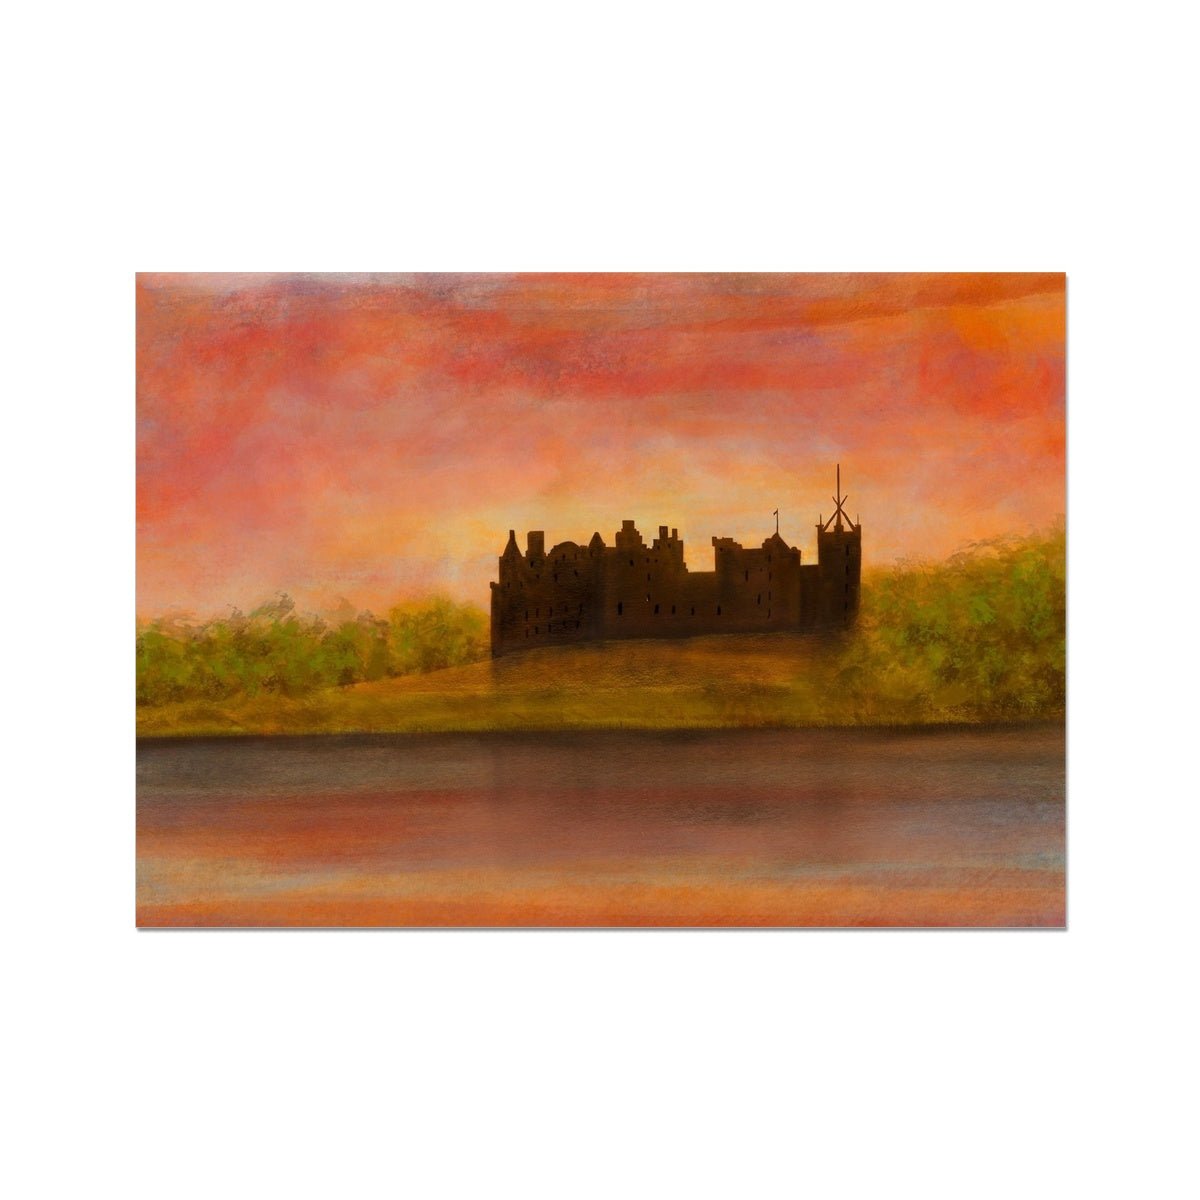 Linlithgow Palace Dusk Painting | Fine Art Prints From Scotland-Unframed Prints-Historic & Iconic Scotland Art Gallery-A2 Landscape-Paintings, Prints, Homeware, Art Gifts From Scotland By Scottish Artist Kevin Hunter